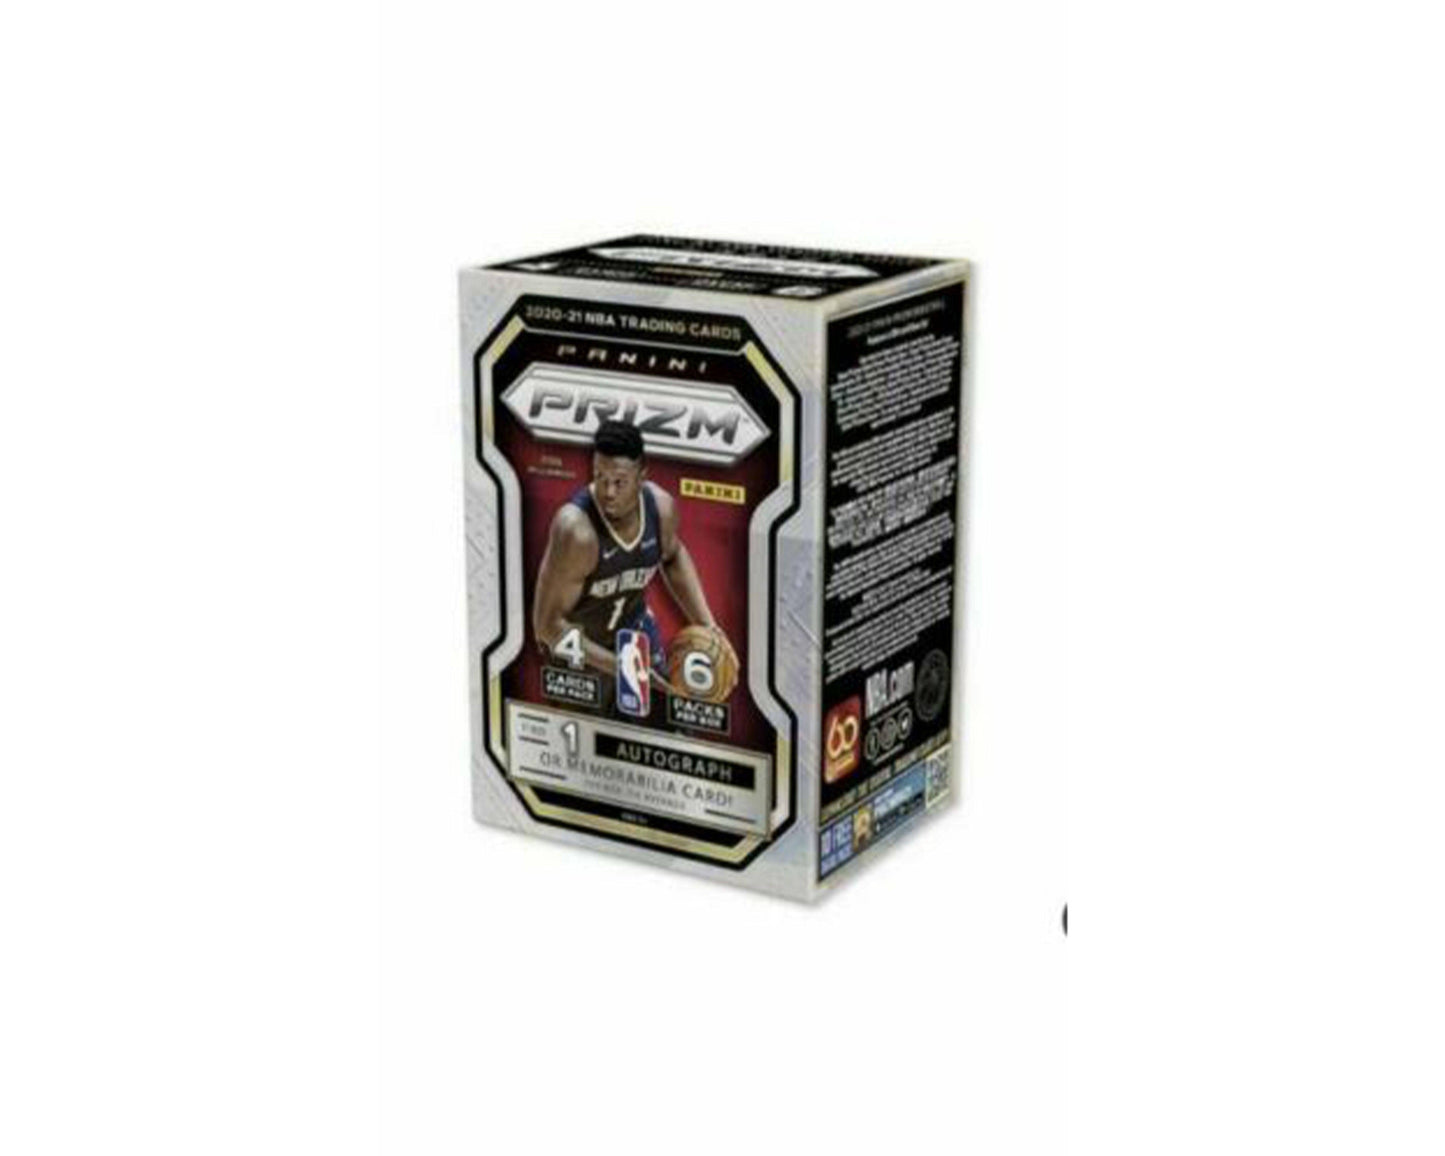 2020-21 Panini Prizm Basketball Blaster Box - Only at www.BallersClubKickz.com - The 2020-21 Panini Prizm Basketball Blaster Box comes with four cards per pack and six packs per box. Inside you will have the chance to find Blaster exclusive Green Pulsar & Purple Wave Prizms, as well as one autograph or memorabilia card on average. 